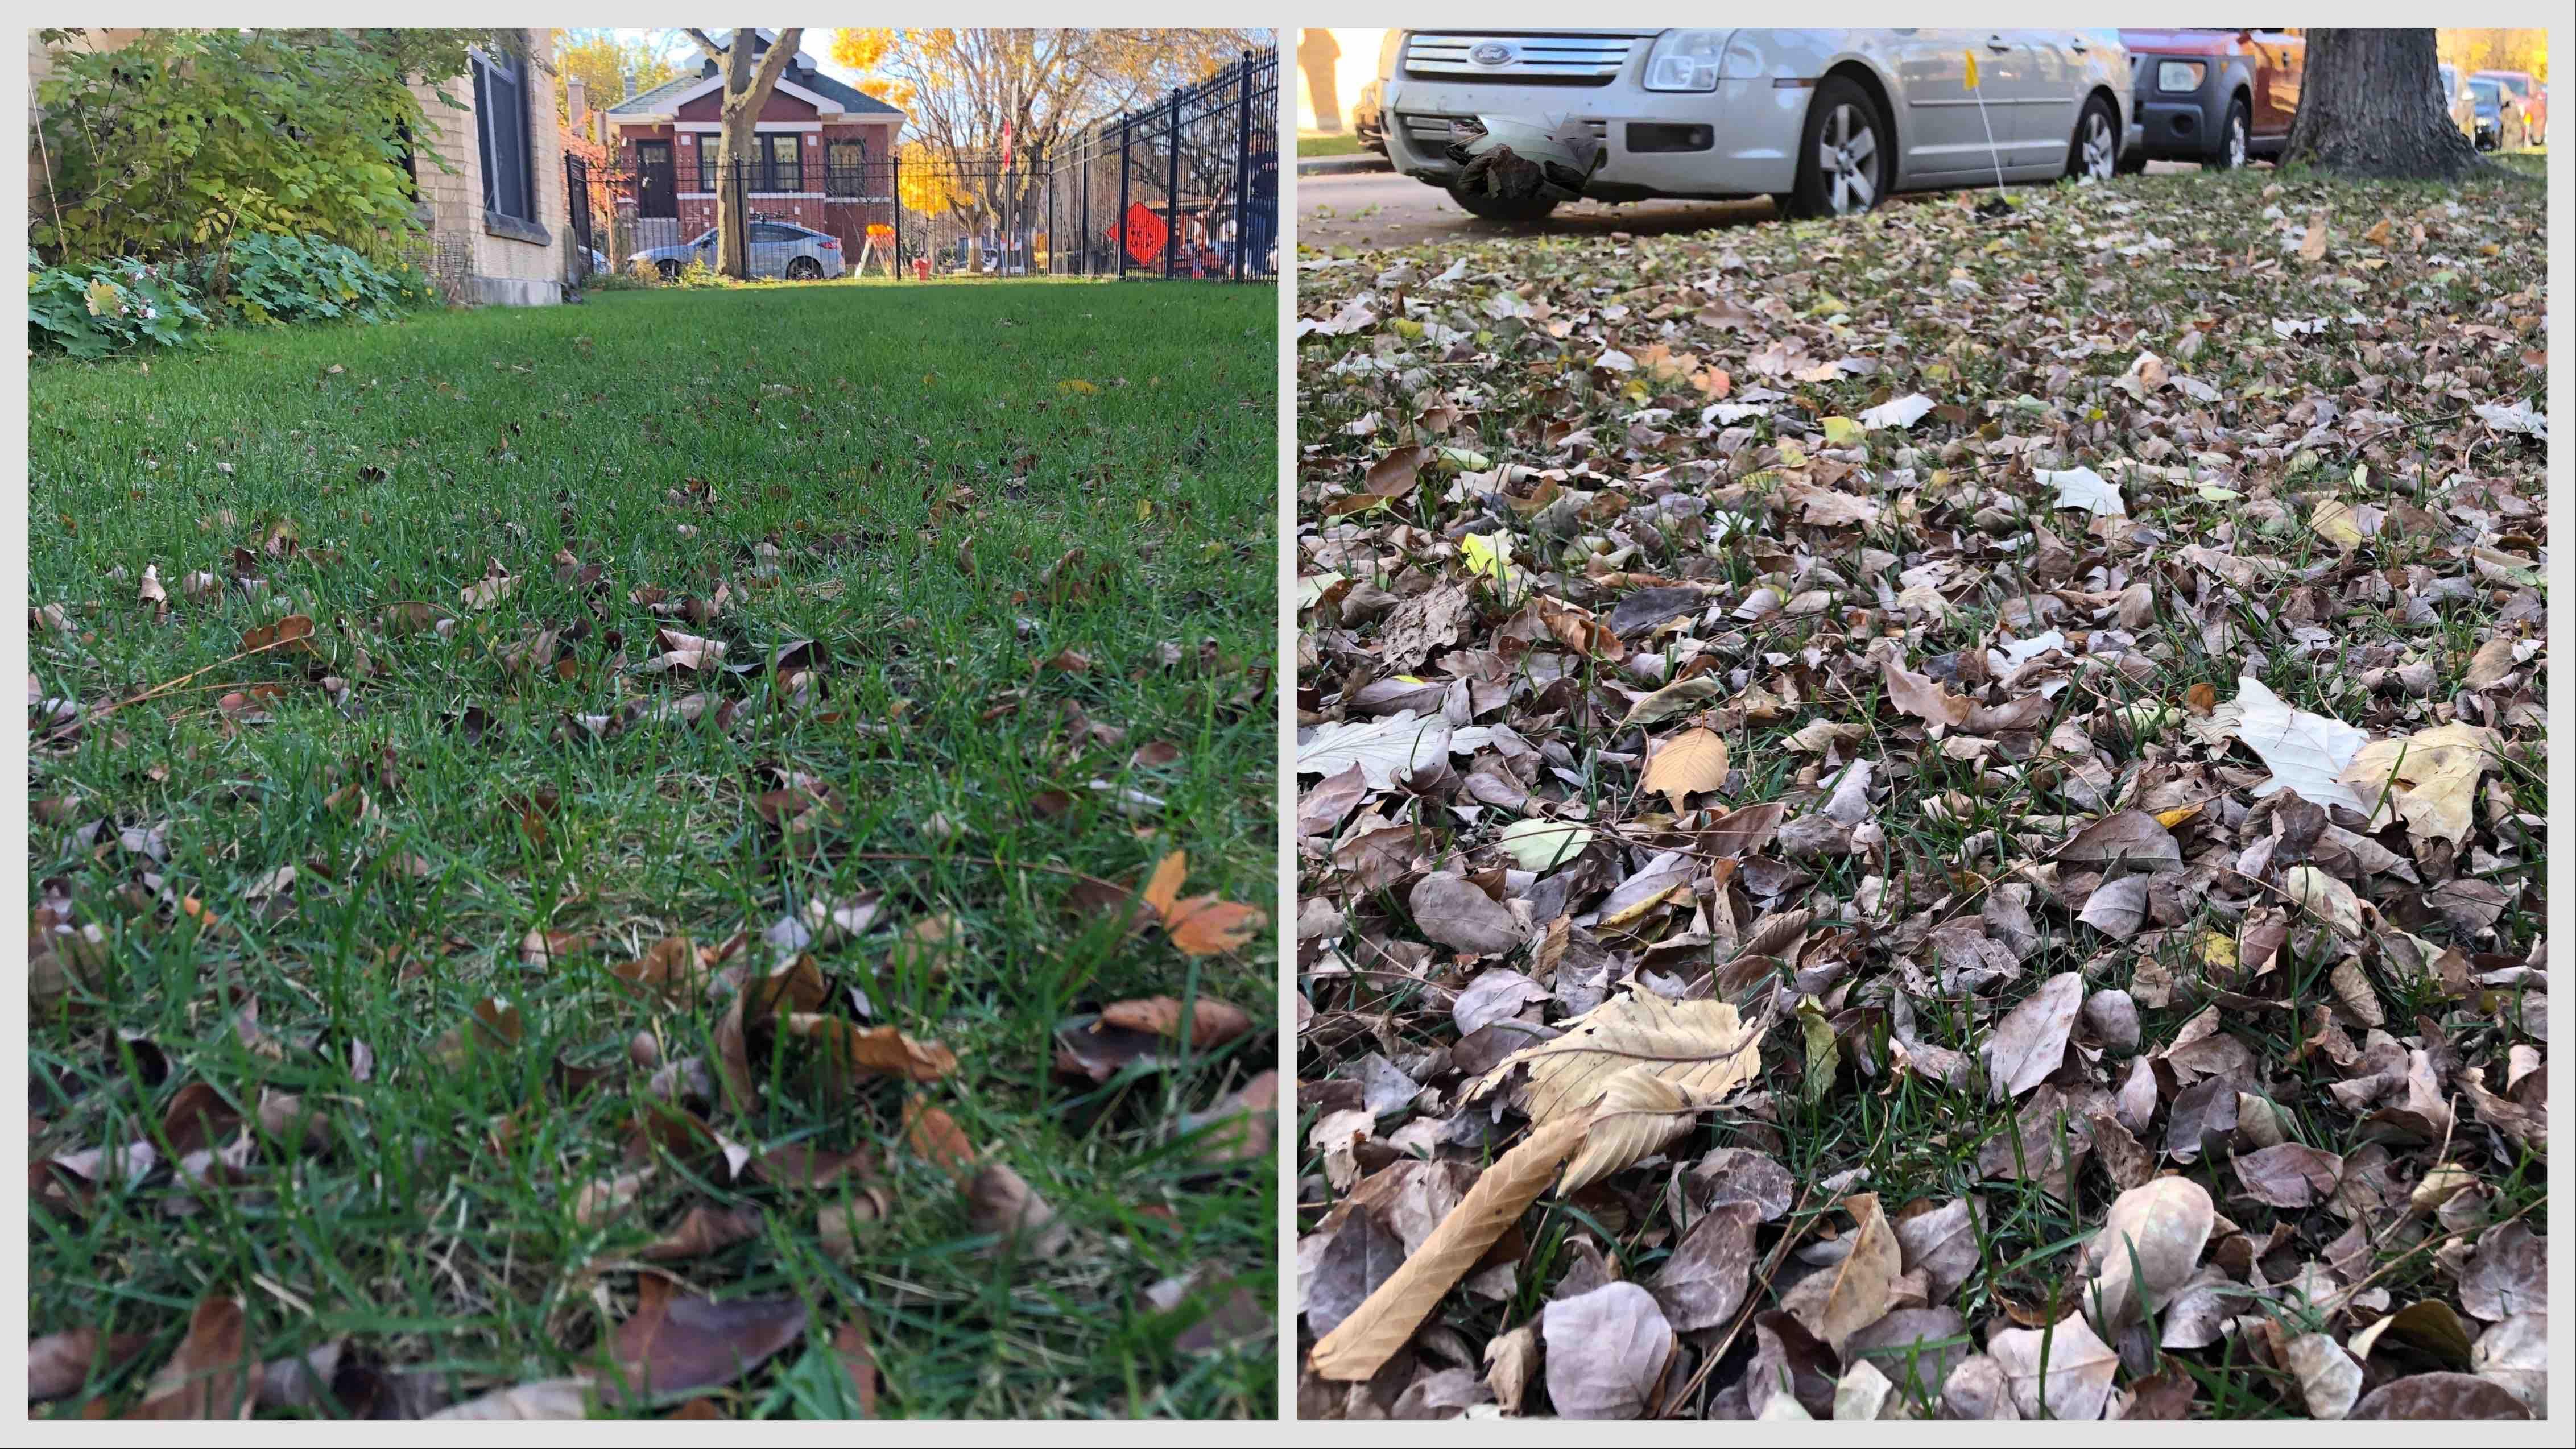 Lawns can withstand 10% to 15% leaf cover, more than that and the grass won't receive enough sunlight. (Patty Wetli / WTTW News)